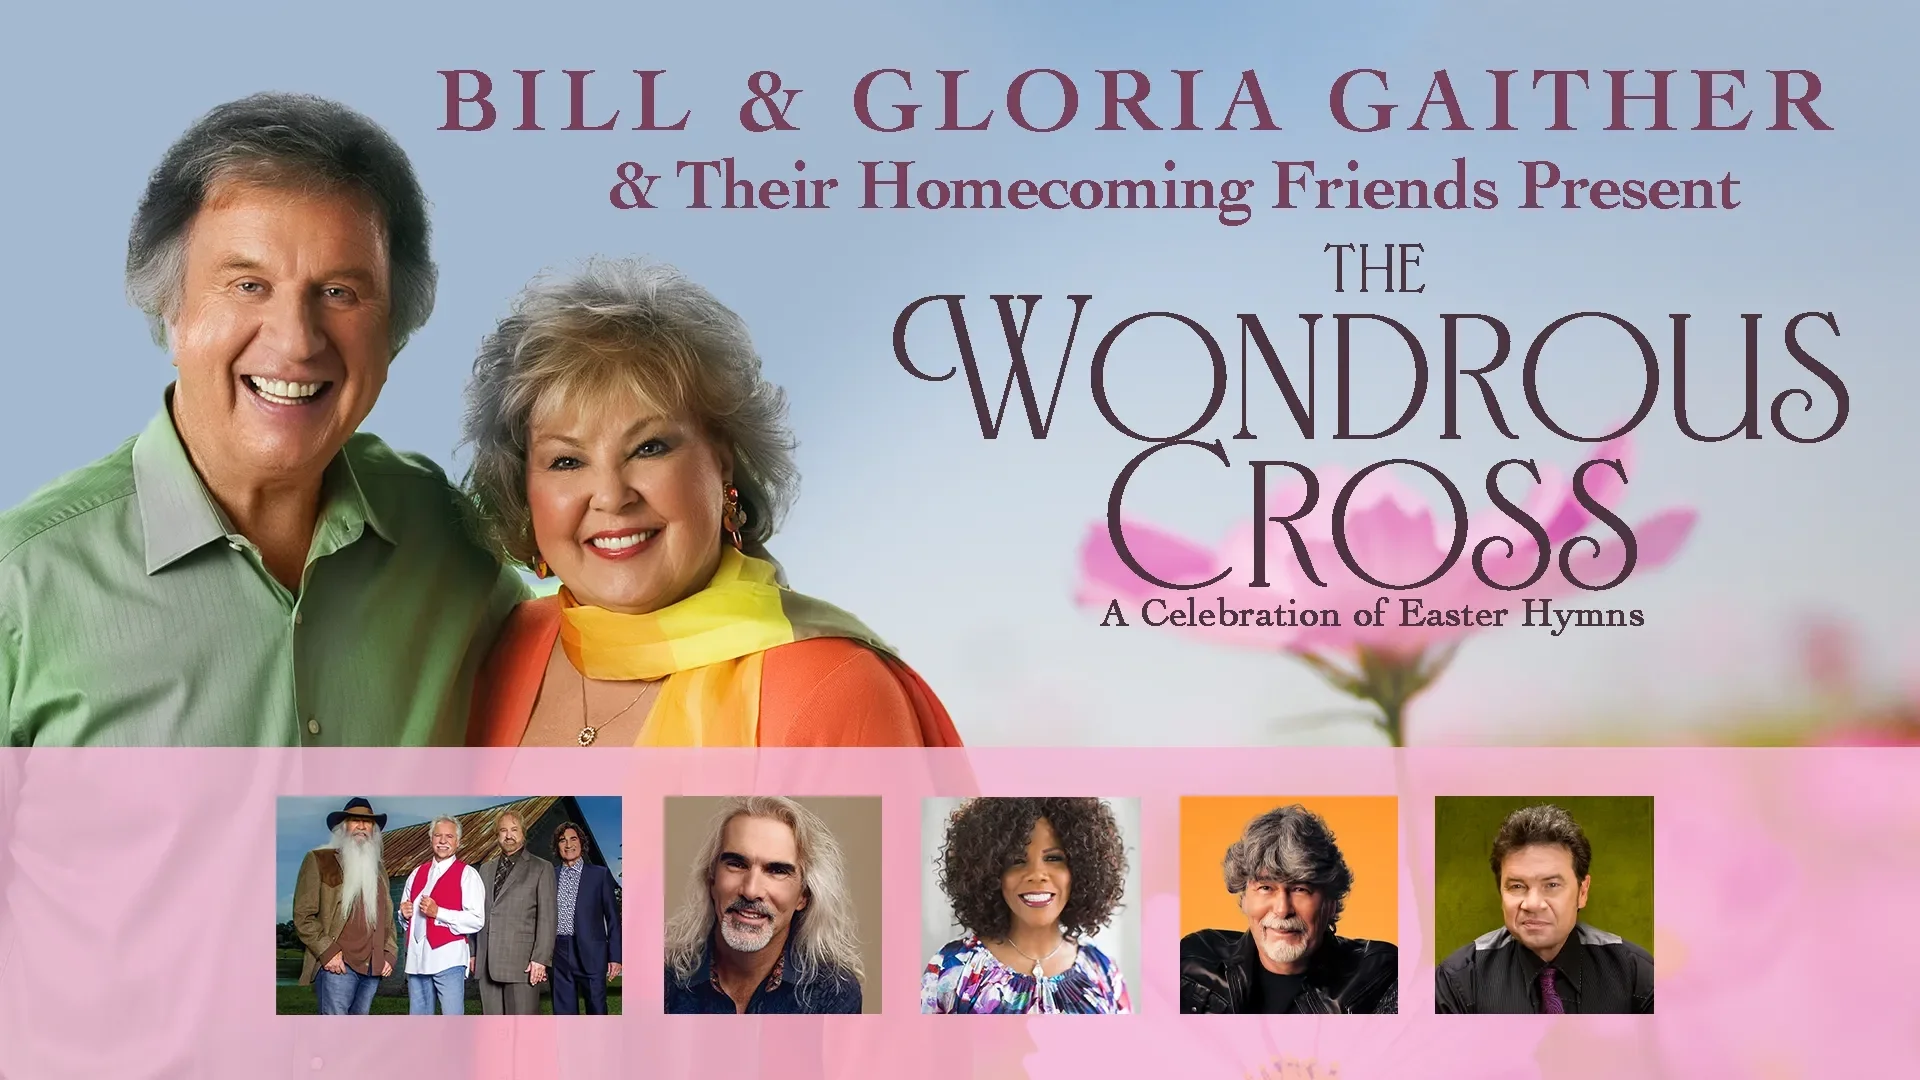 The Wondrous Cross: A Celebration of Easter Hymns